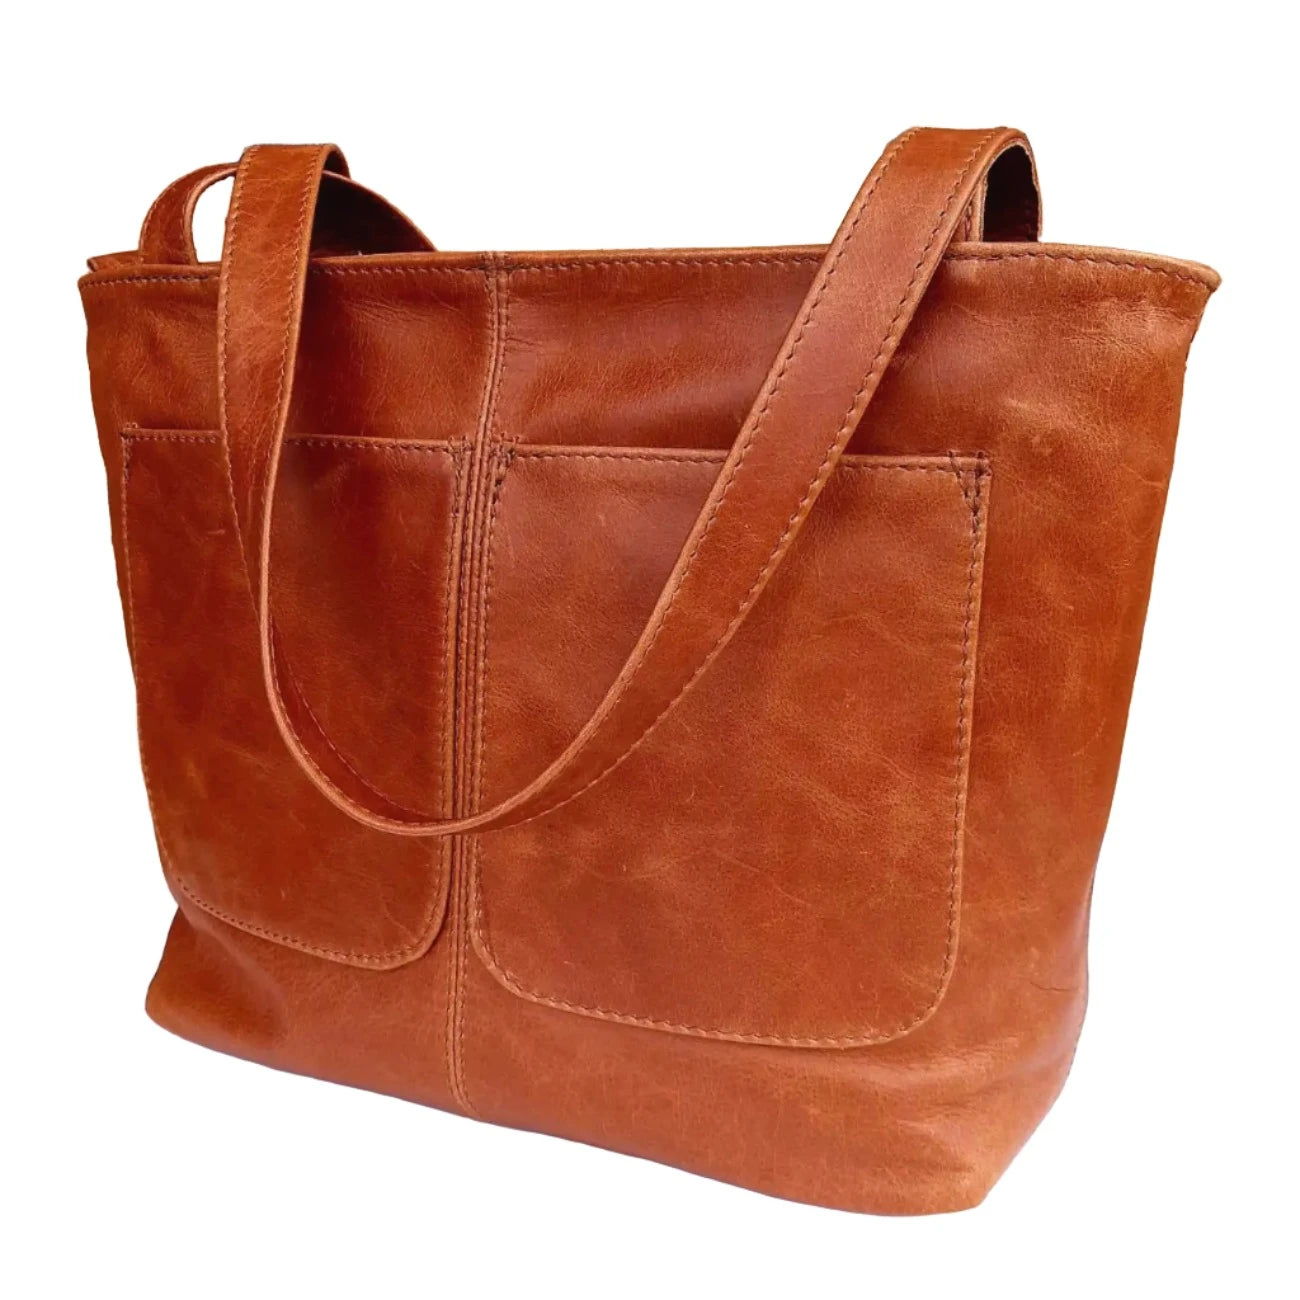 Botha tote designer bags in light tan made by cape Masai leather 